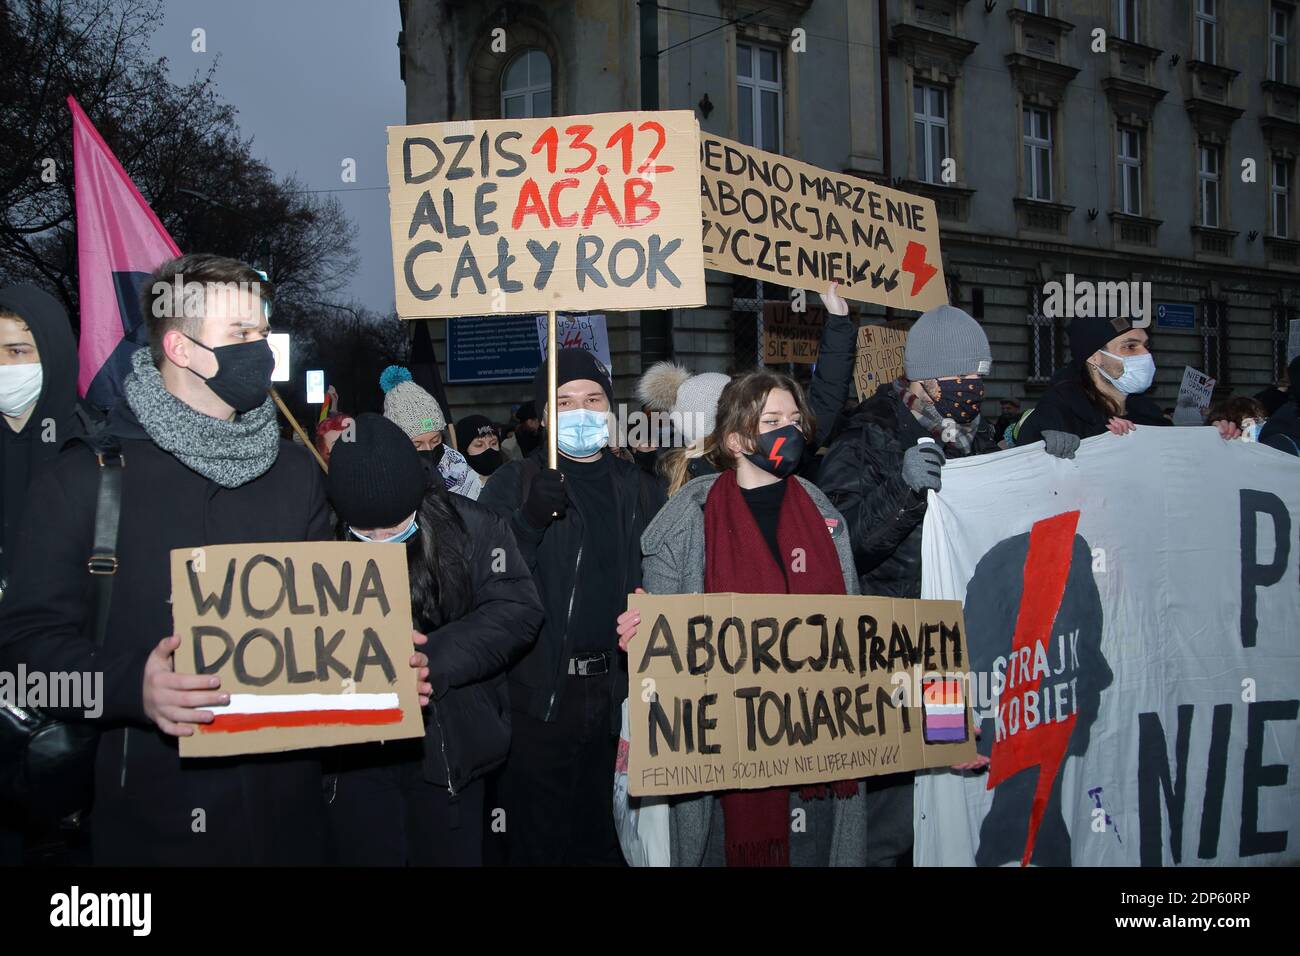 Krakow, Poland - December 13 2020: Demonstartion pro choice, anti-government and Law and Justice party organzied by Women Strike in Krakow, banners Stock Photo